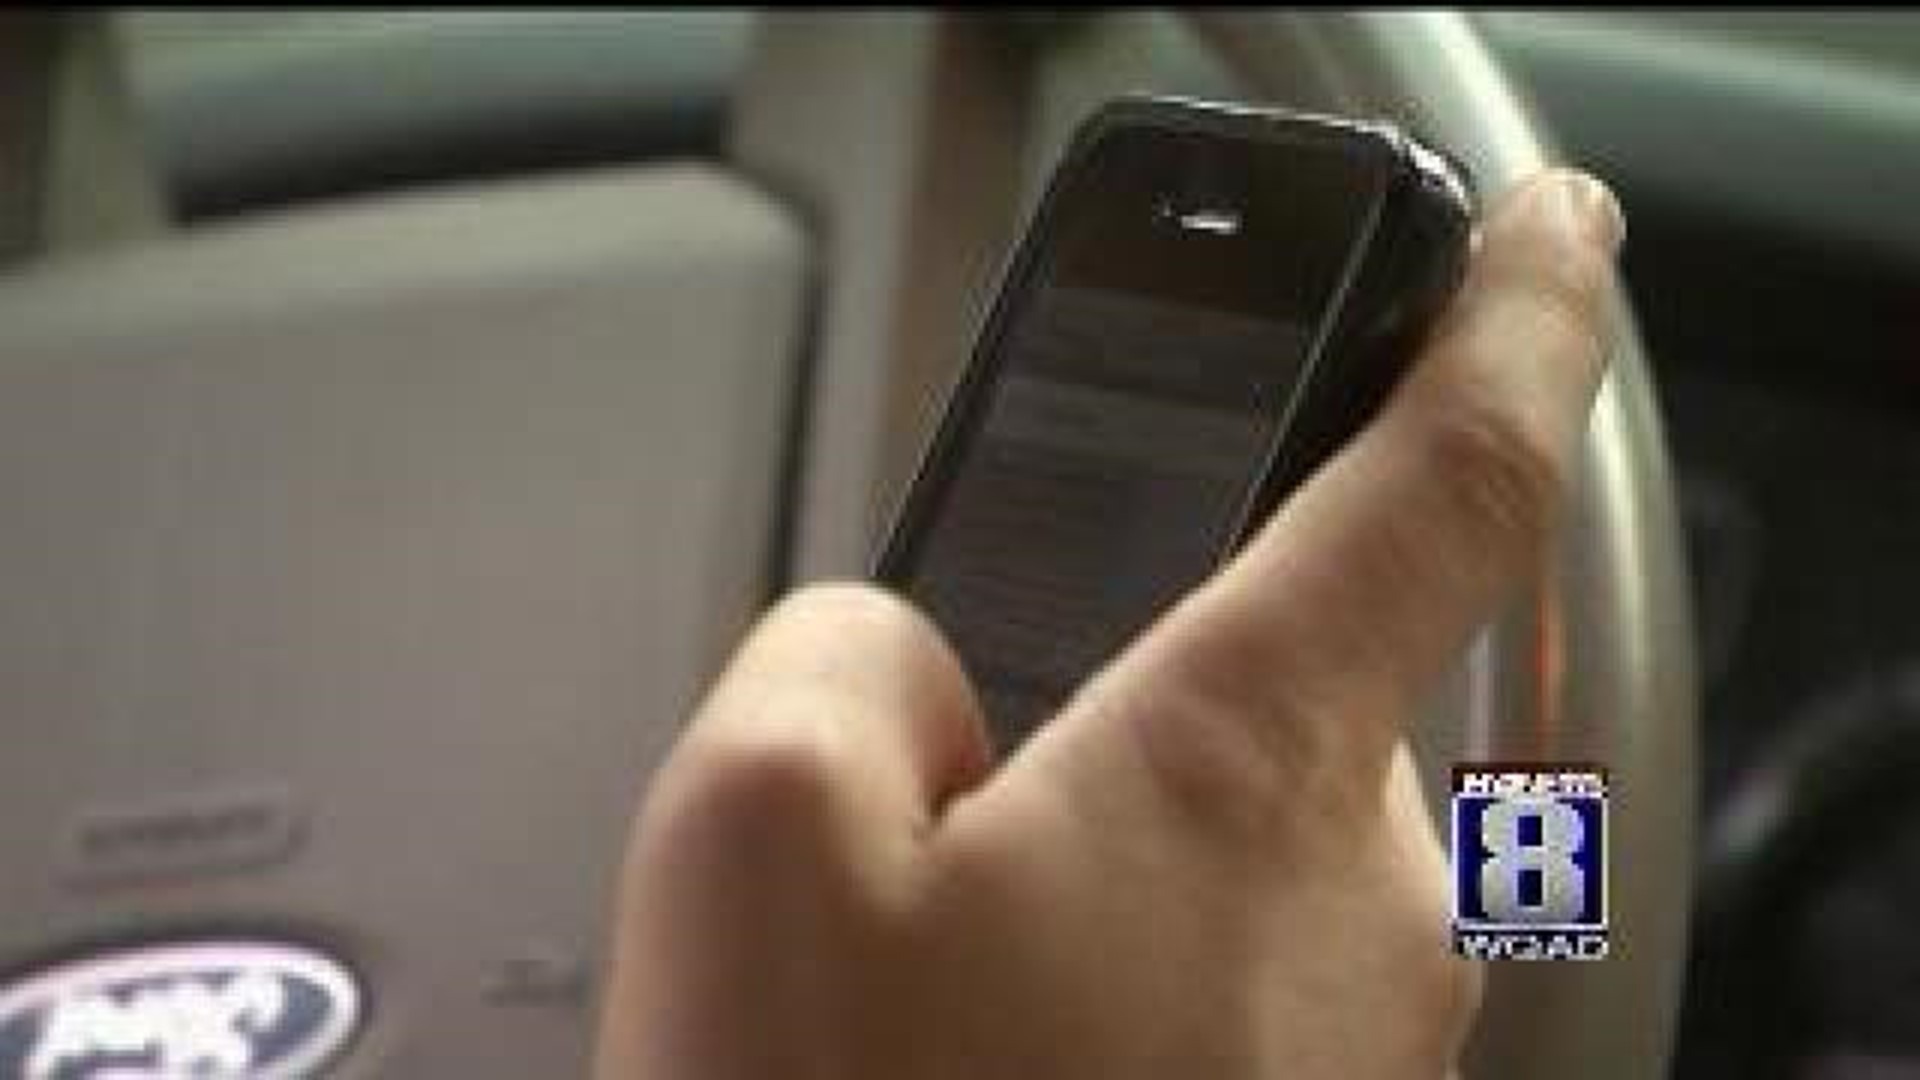 Illinois gets new cell phone restrictions